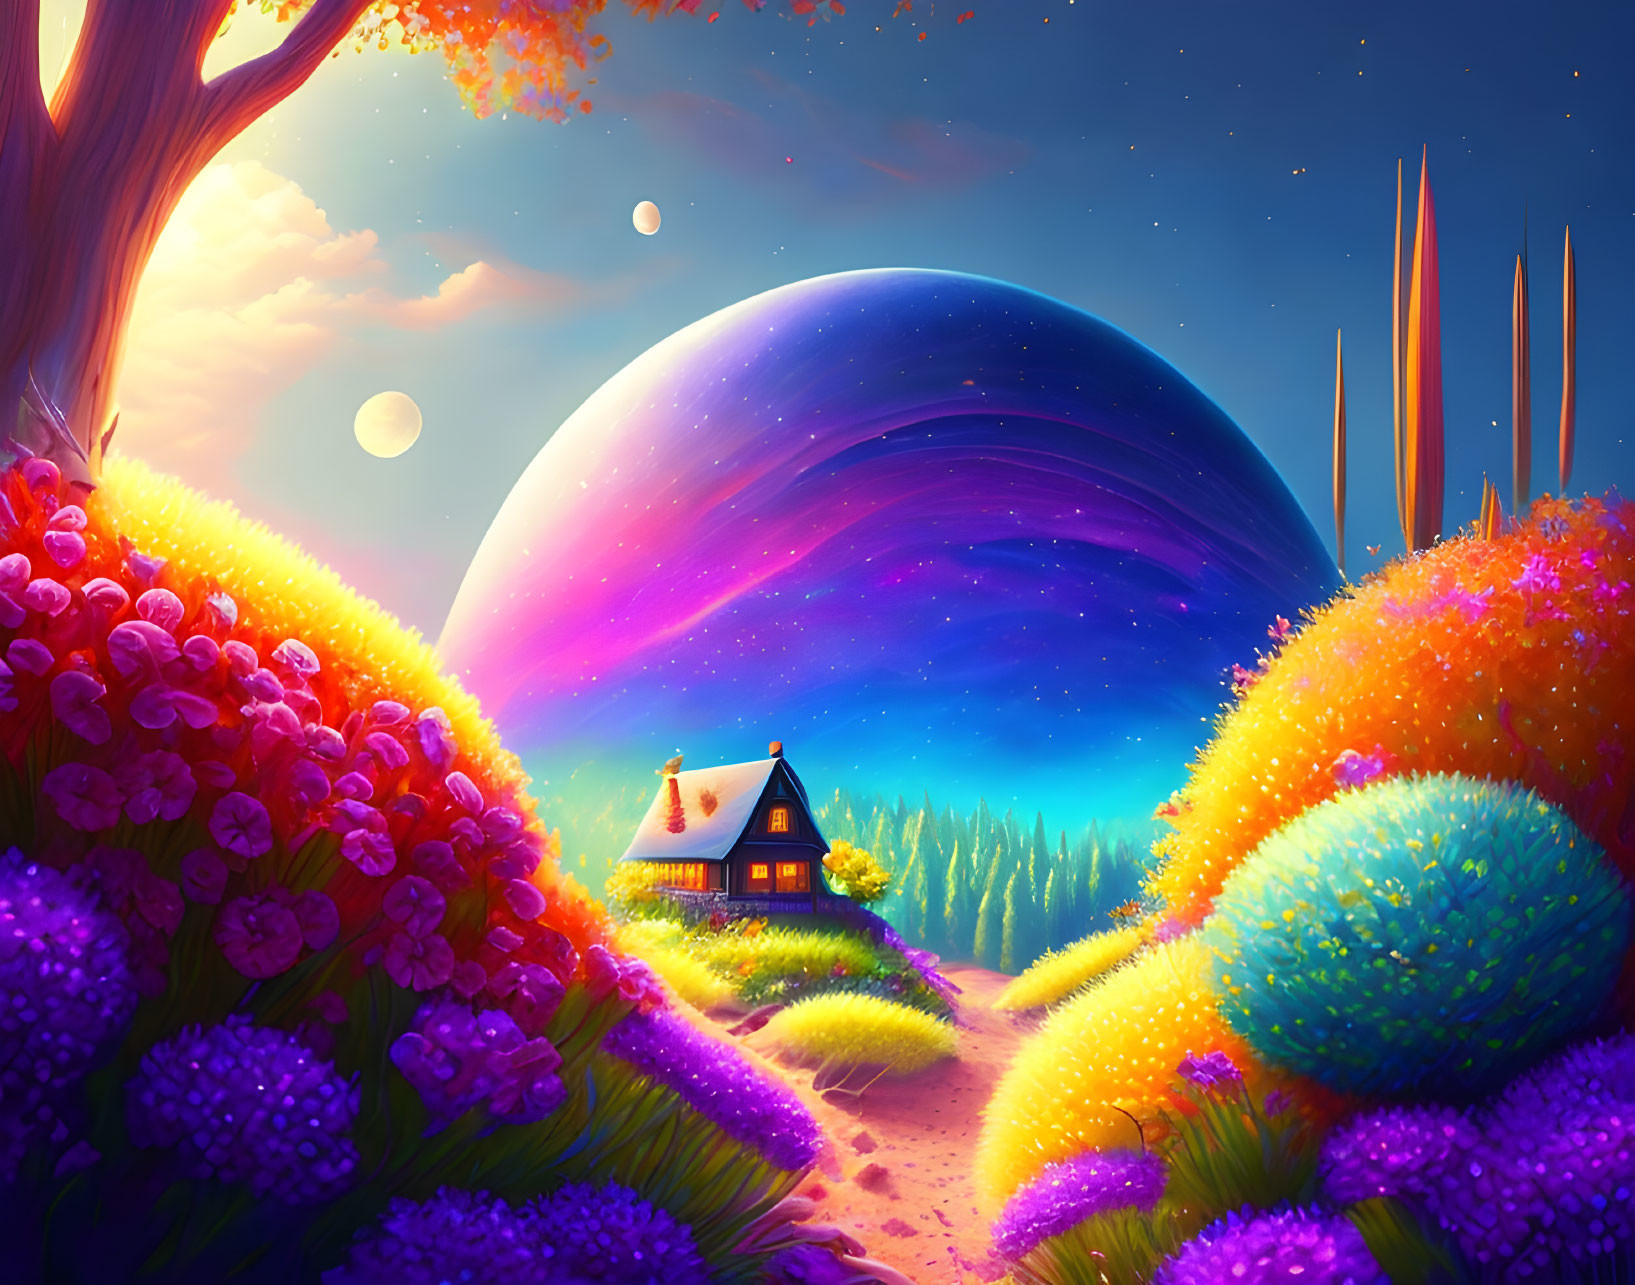 Colorful landscape with cottage, lush flora, giant planet, moons